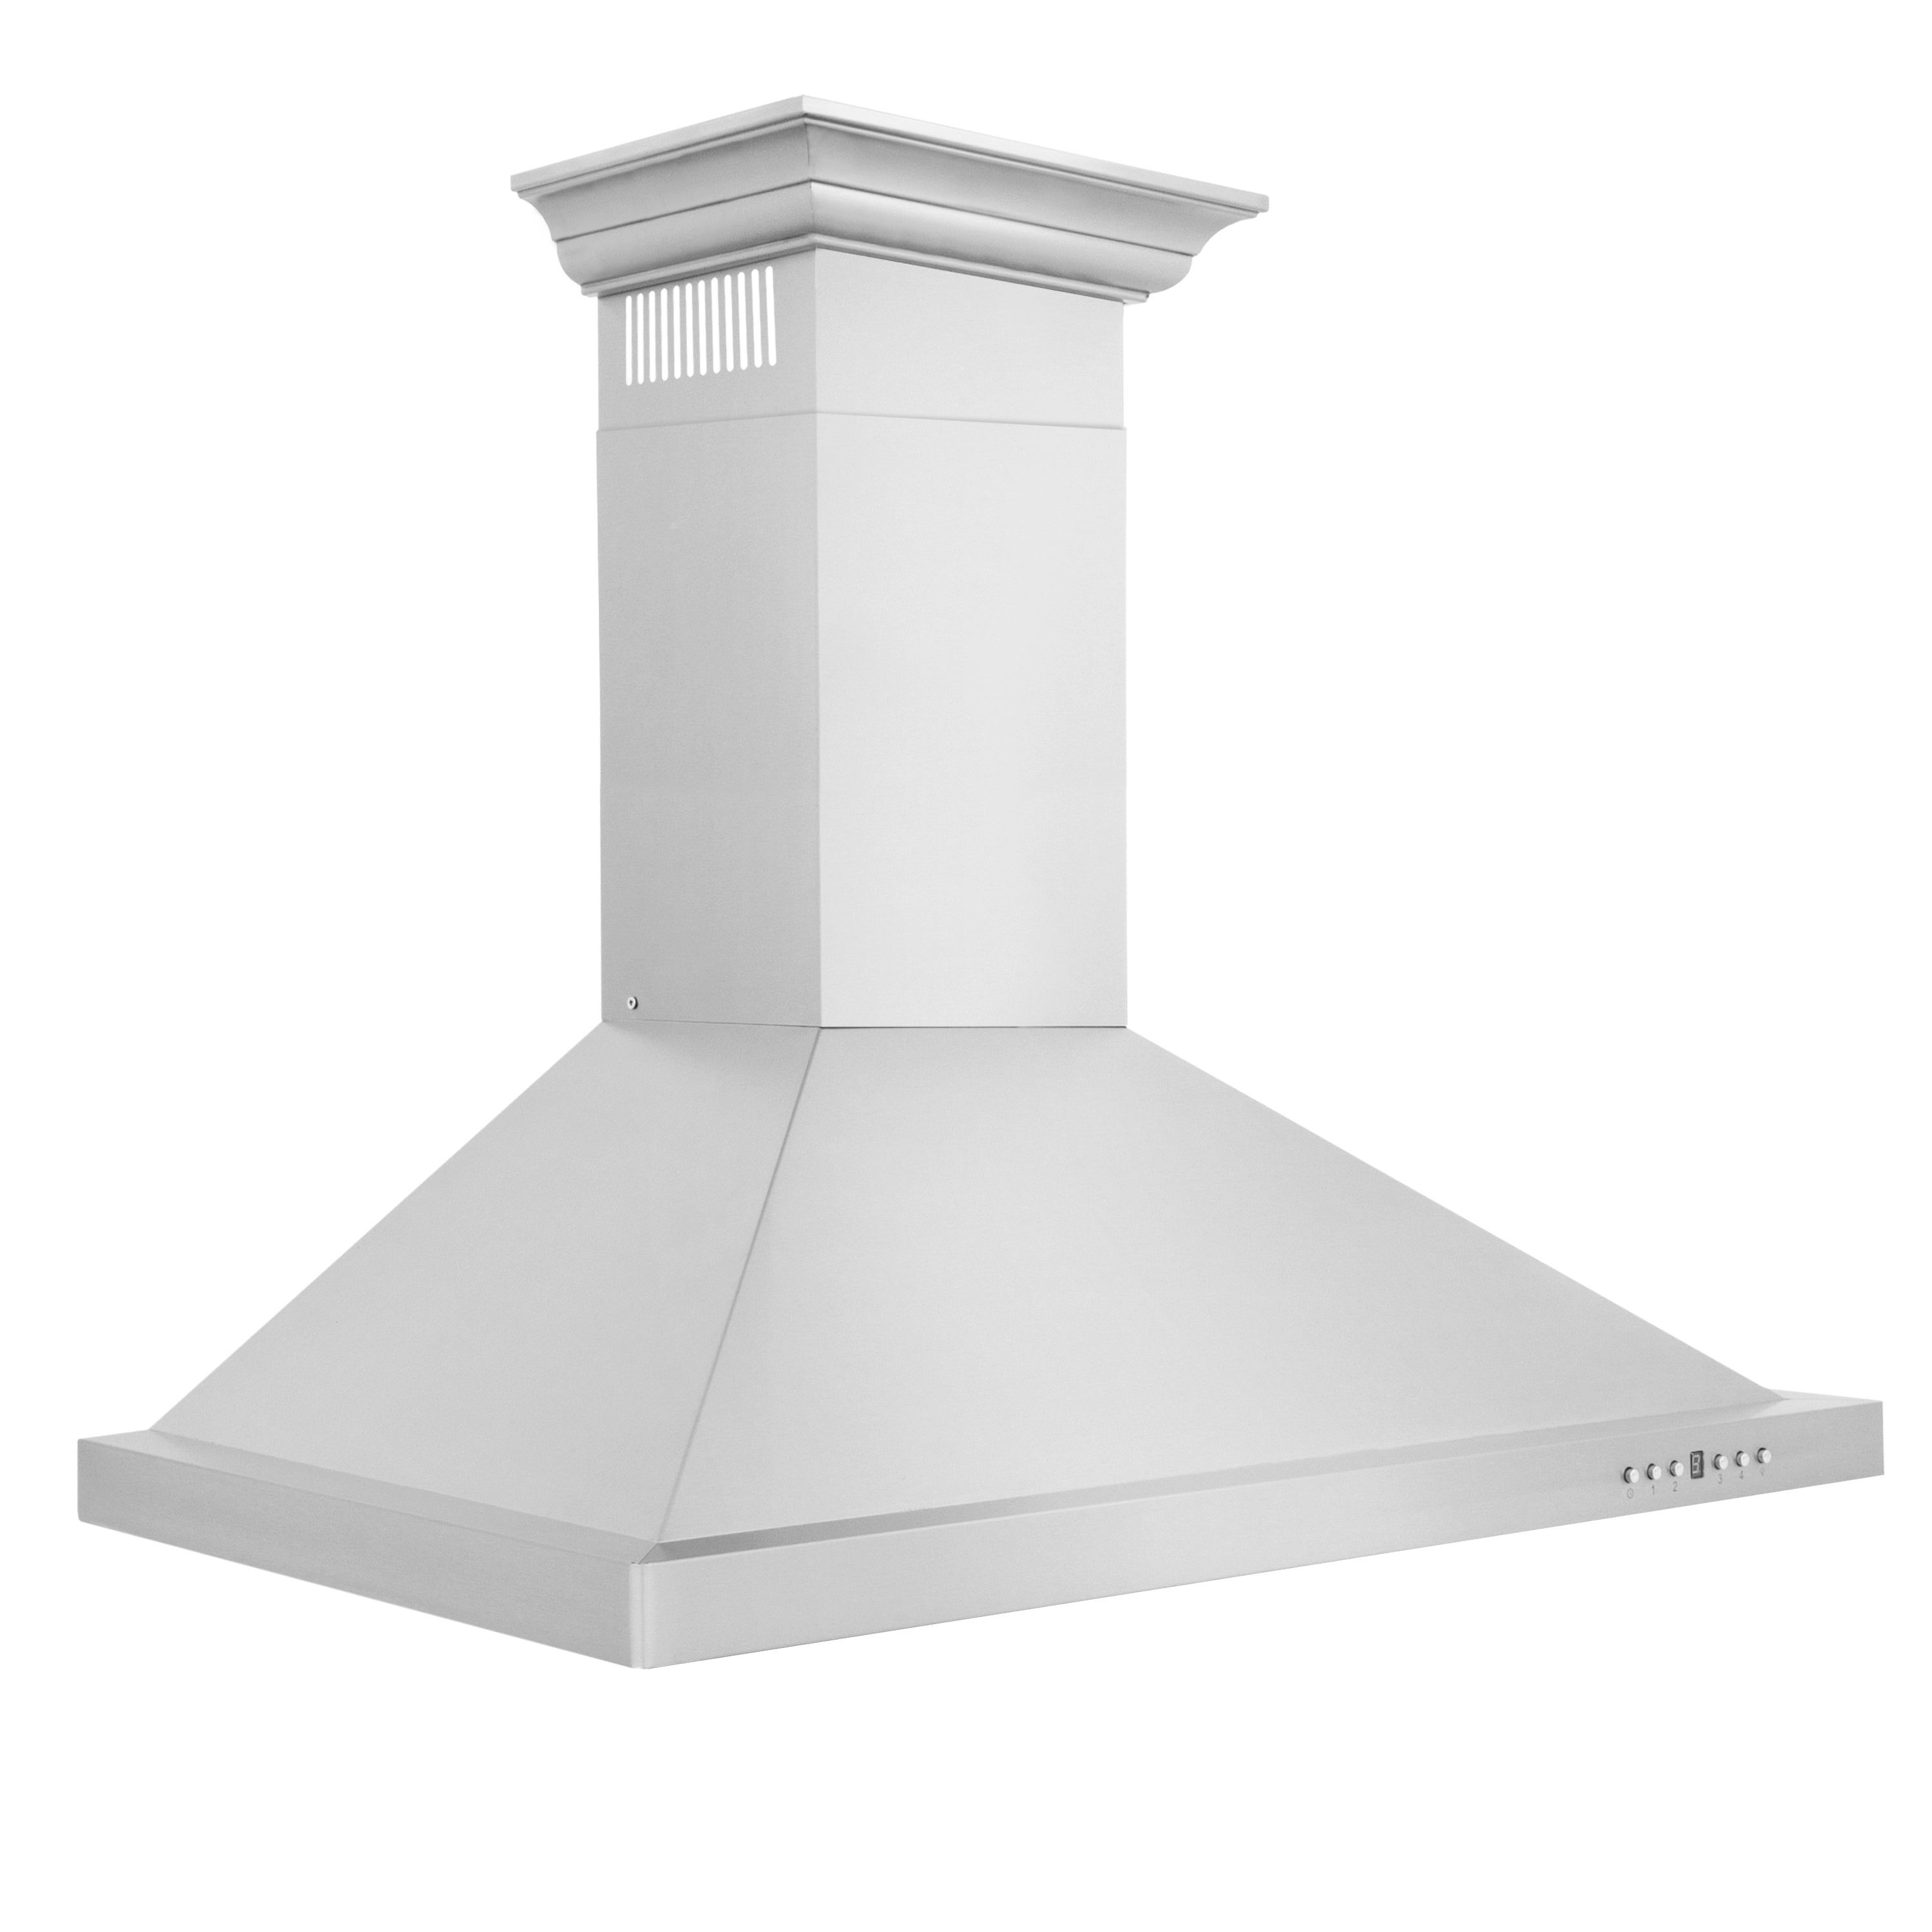 ZLINE 48" Convertible Vent Wall Mount Range Hood in Stainless Steel with Crown Molding (KBCRN-48)